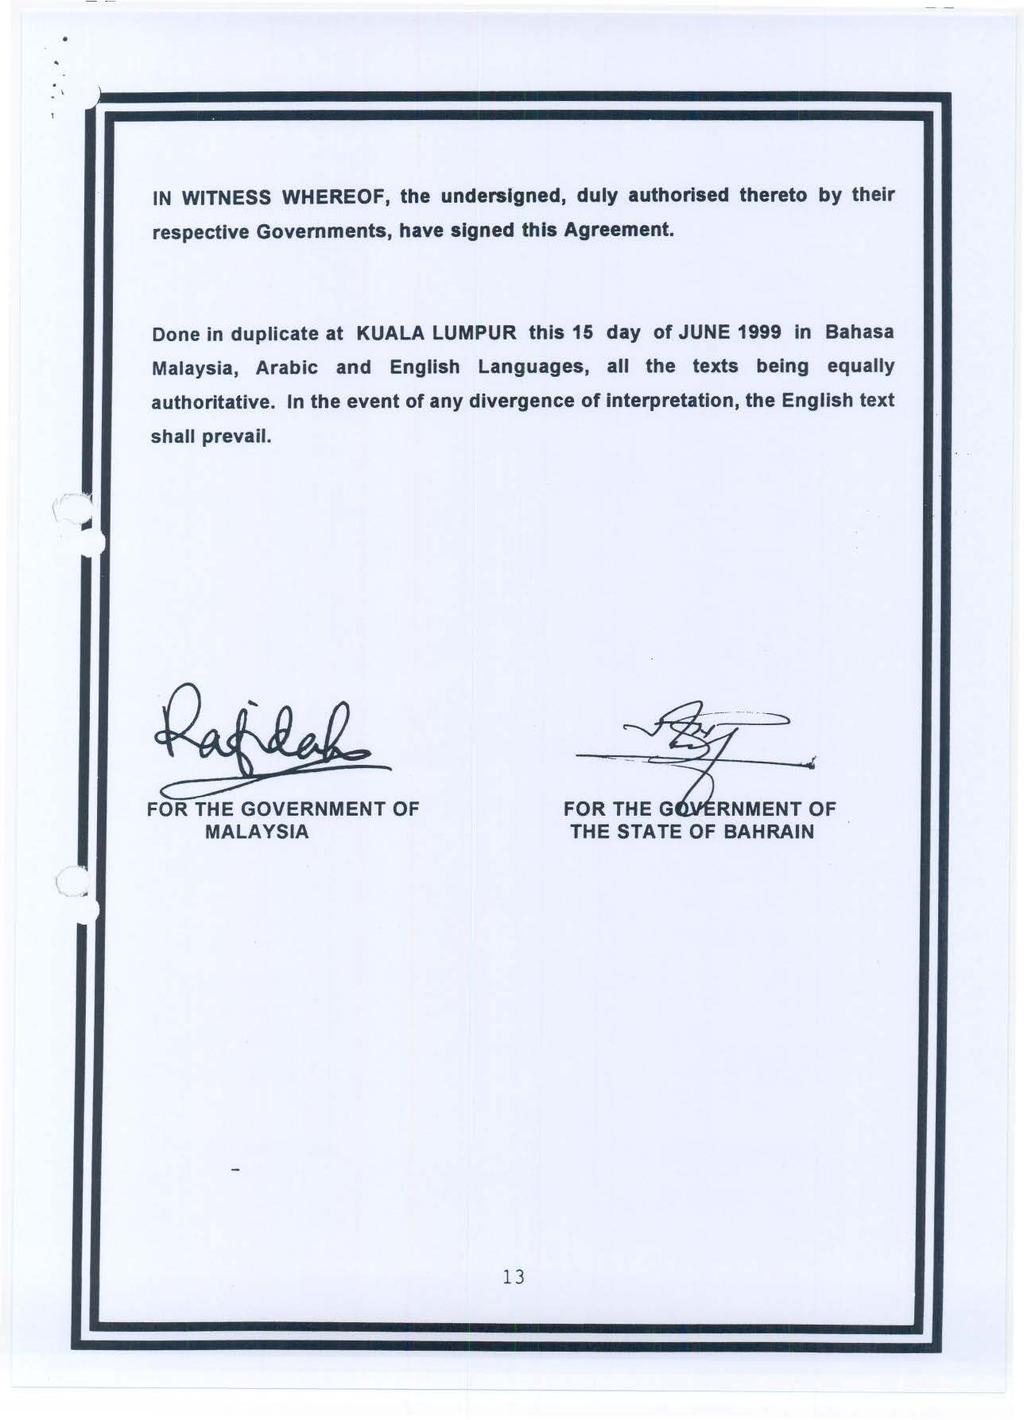 IN WITNESS WHEREOF, the undersigned, duly authorised thereto by their respective Governments, have signed this Agreement.